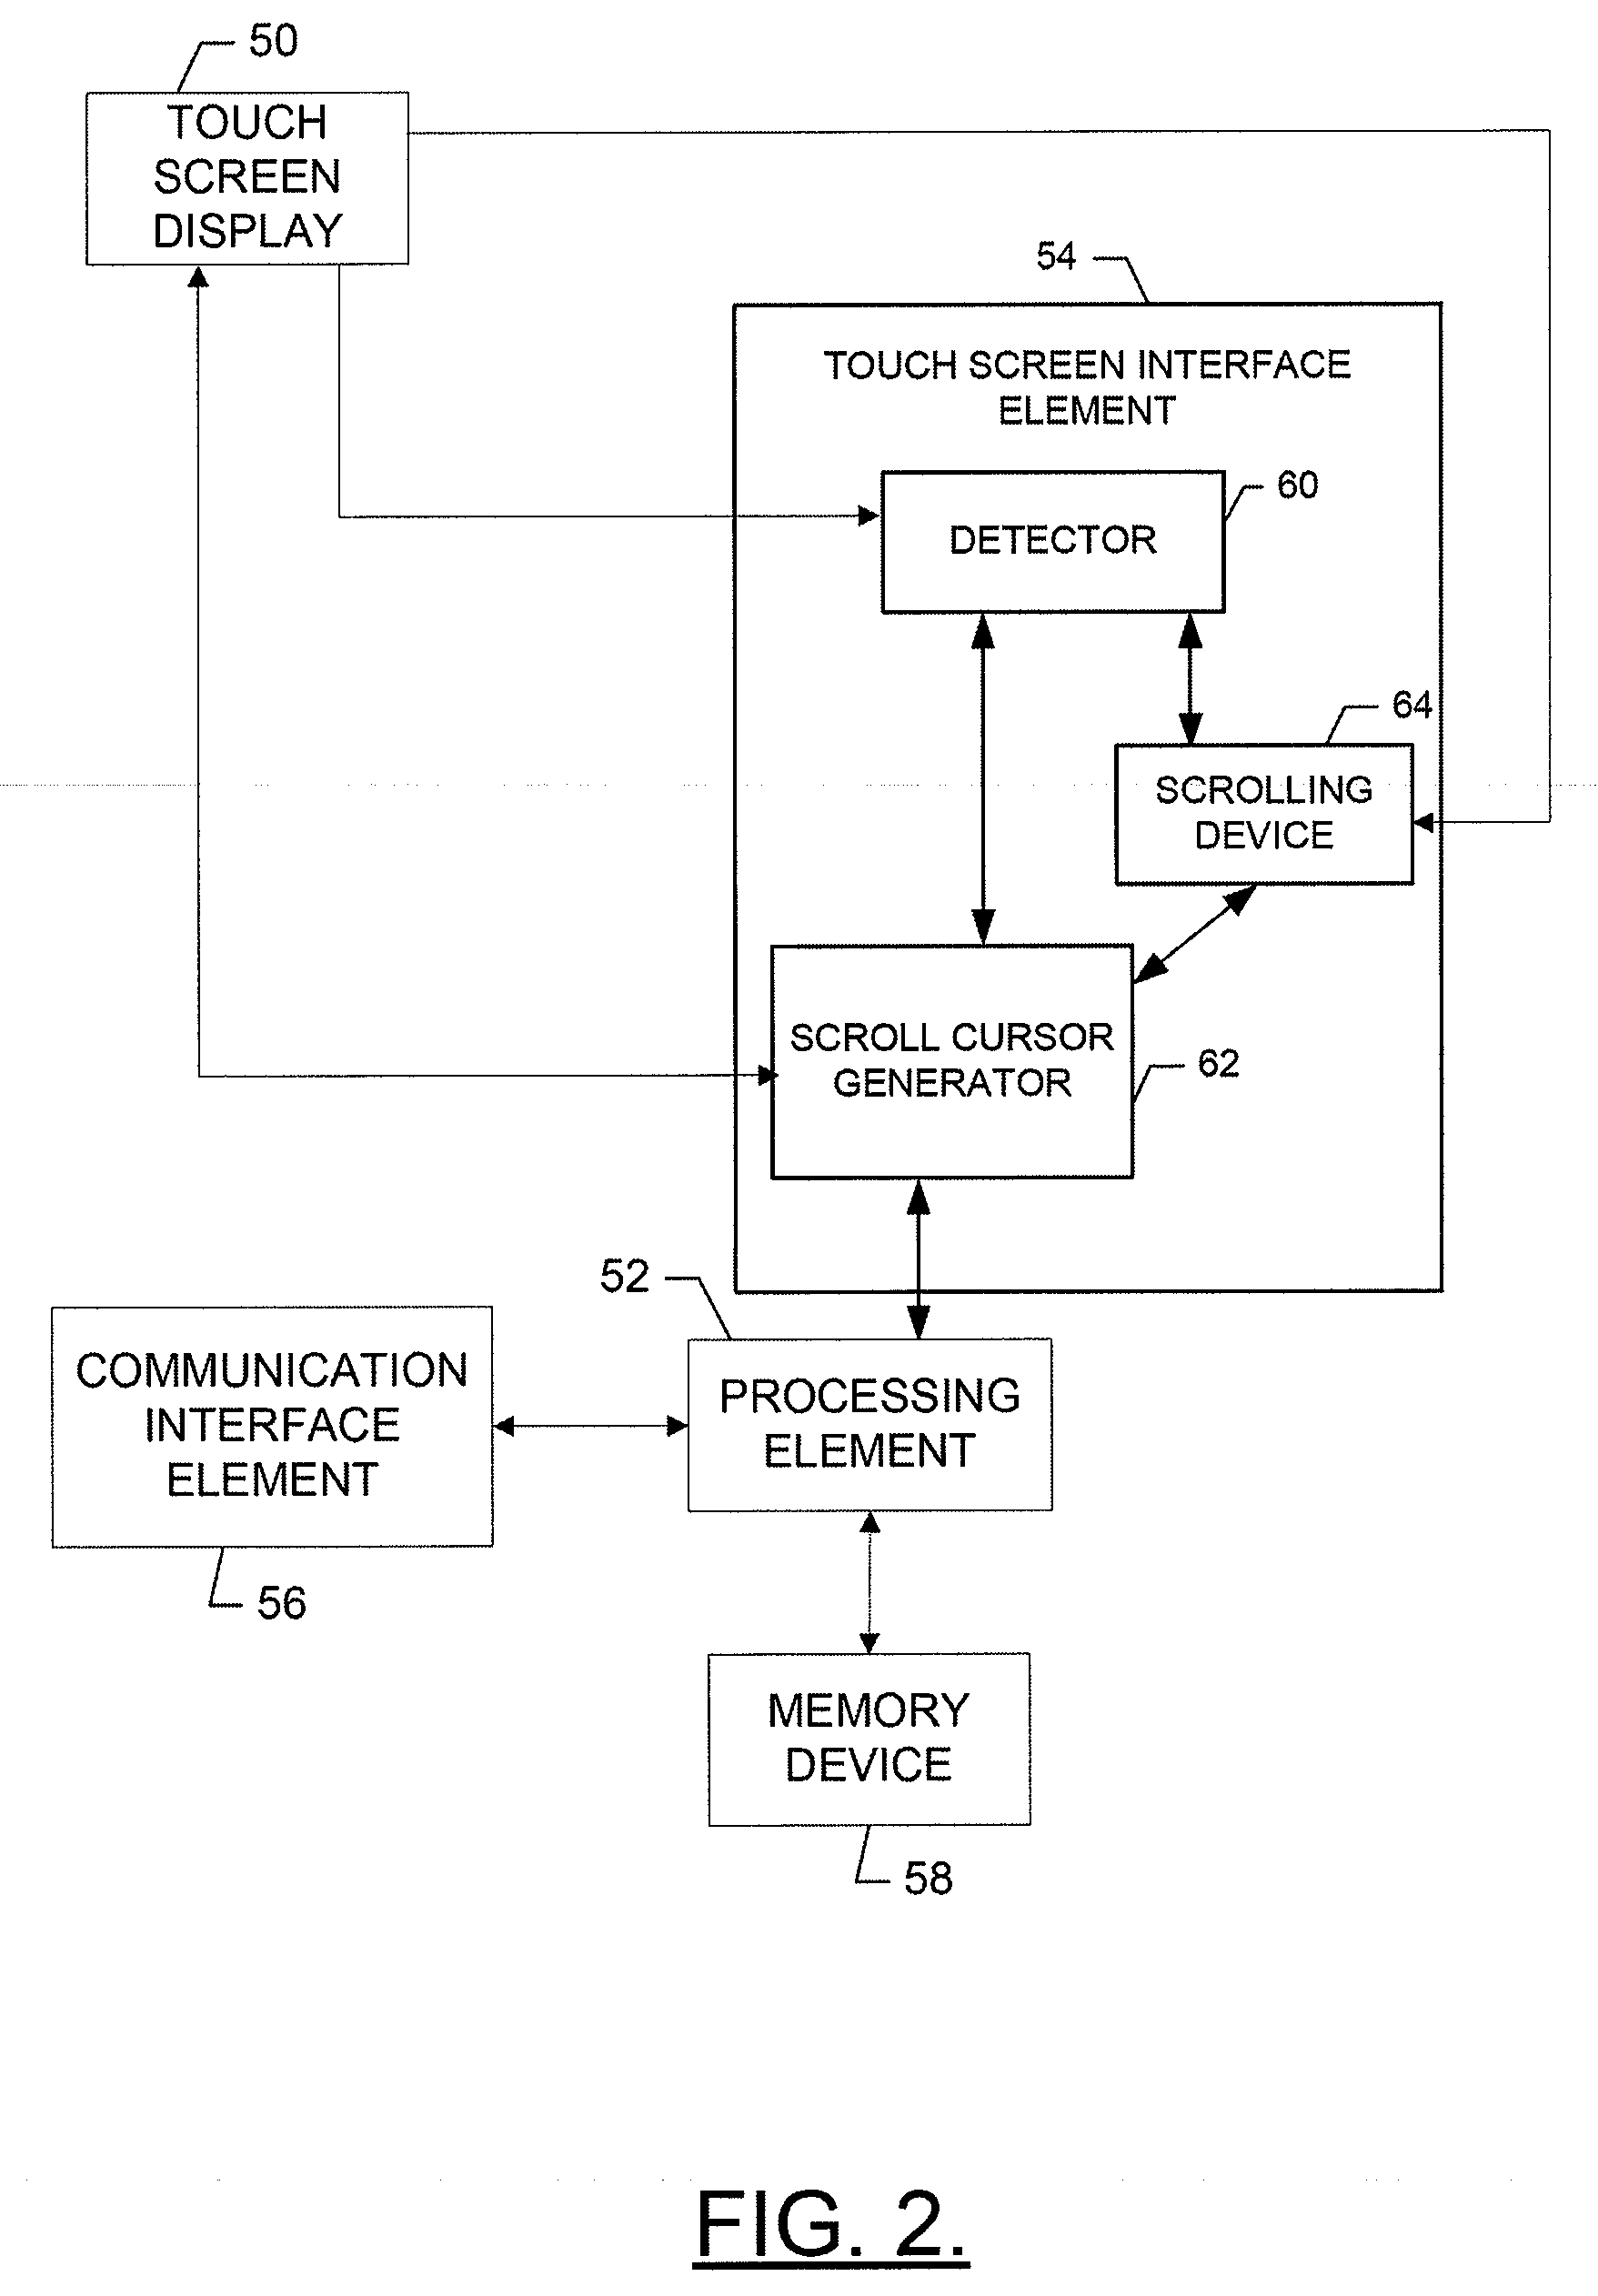 Method, Apparatus and Computer Program Product for Providing a Scrolling Mechanism for Touch Screen Devices